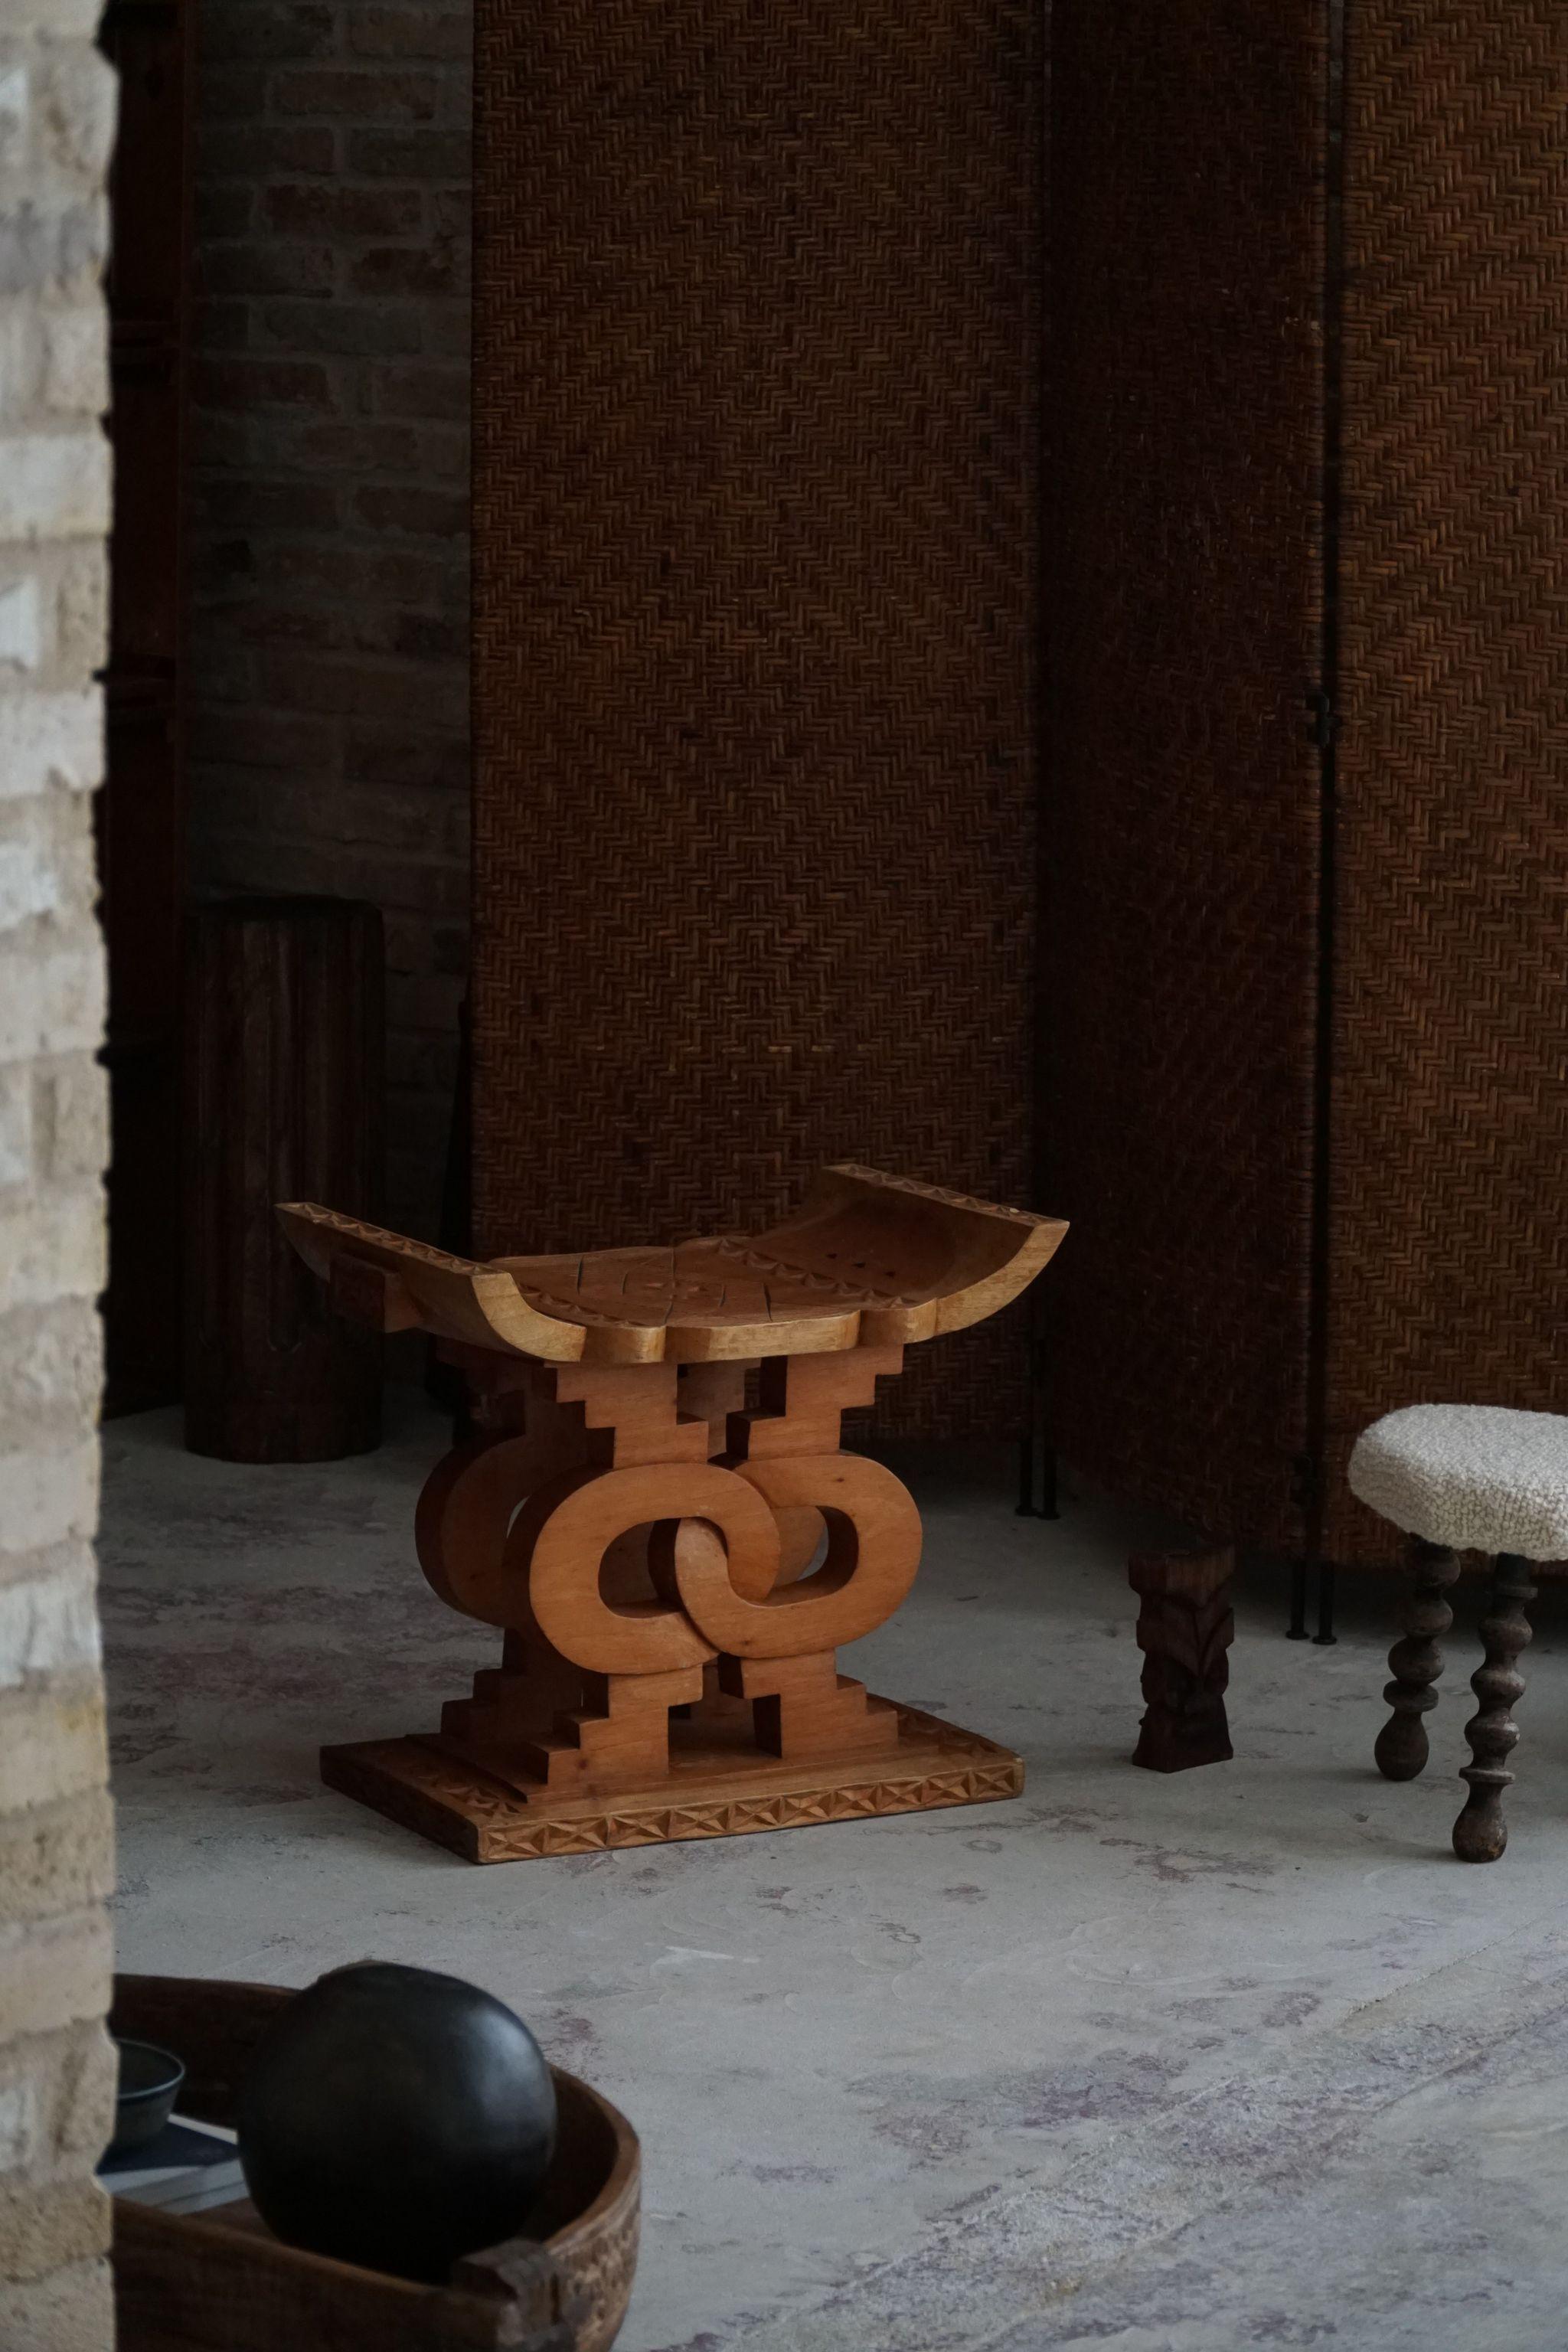 A highly decorative handcrafted Ashanti stool, made in West Africa(Ghana) in the 1970s. A unique design making it a one-of-a-kind piece for your home.

A beautiful wabi sabi object with a fine patina. Perfect as functional side table or decorative